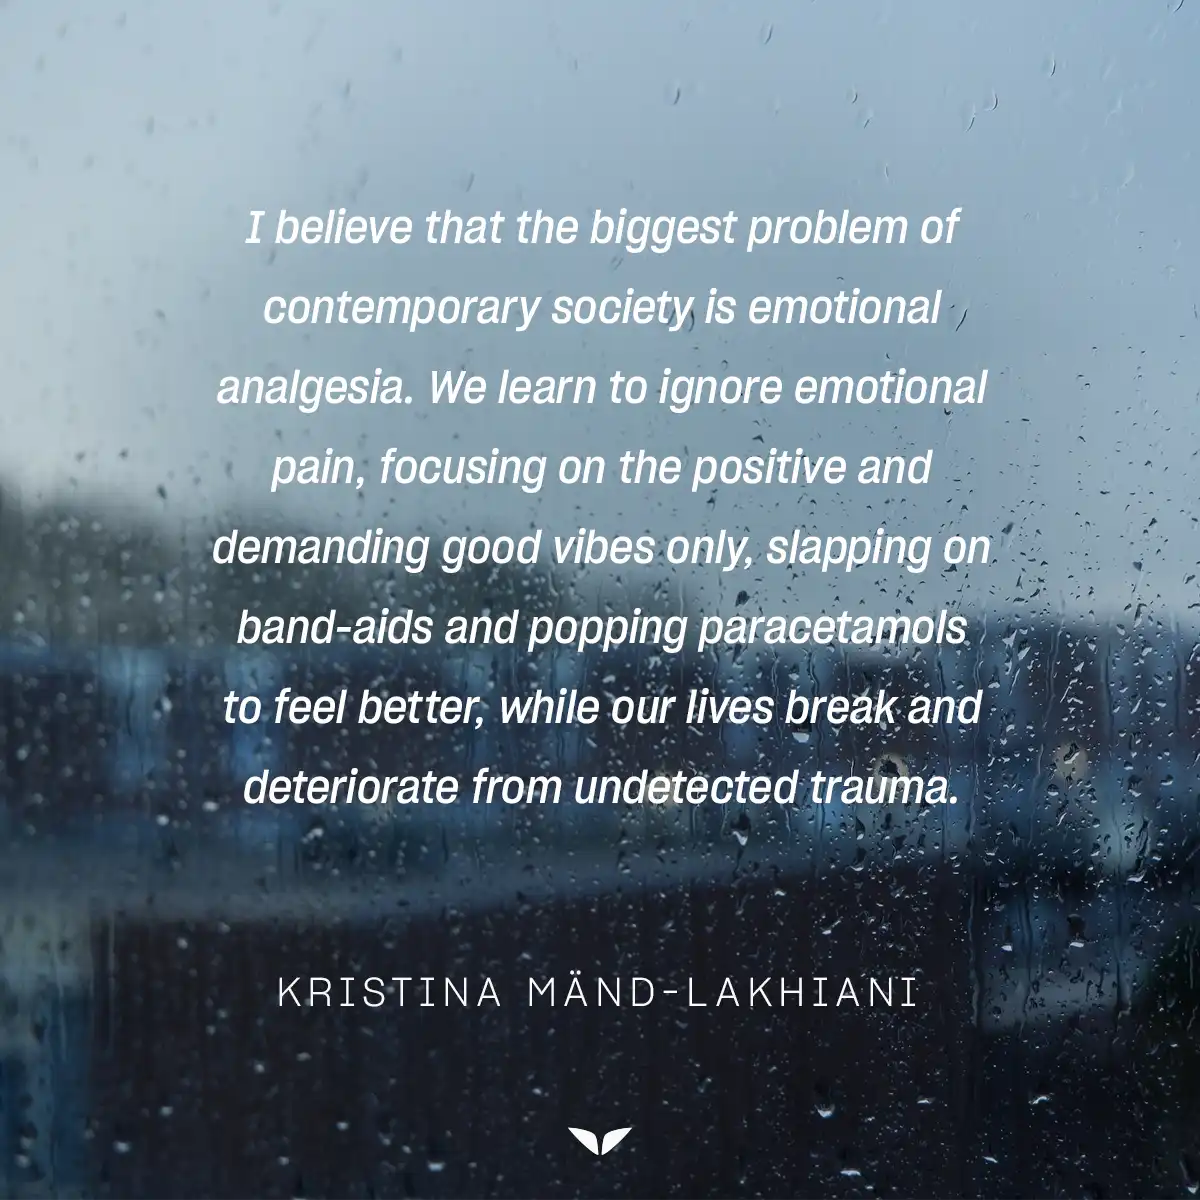 One the many perfectly imperfect quotes about emotional analgesia by Kristina Mänd-Lakhiani